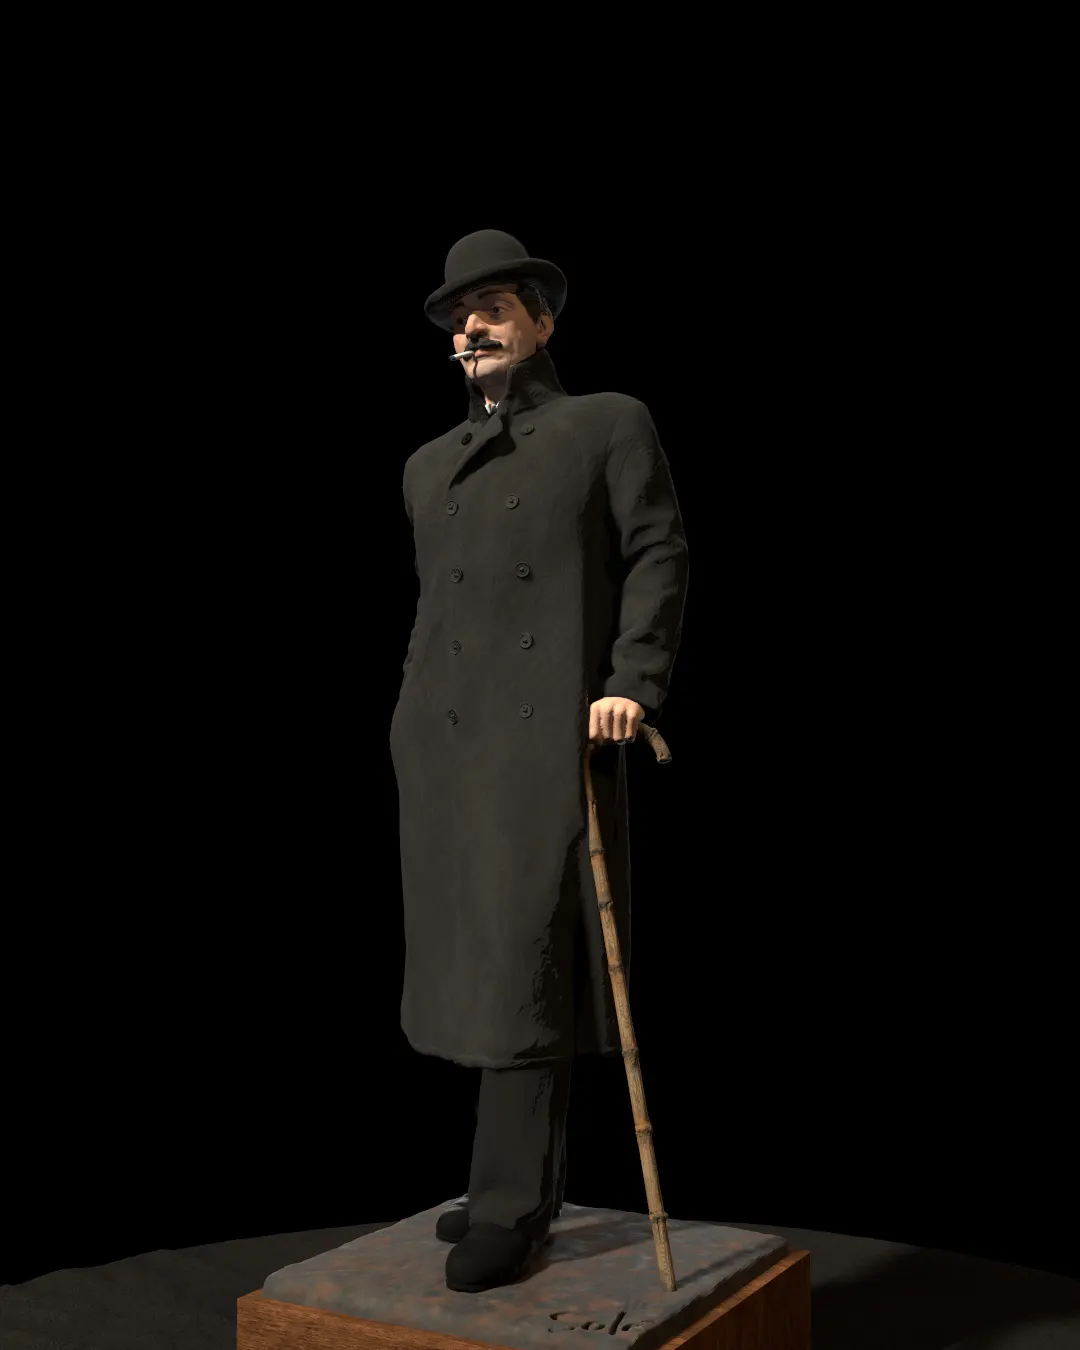 Giacomo-Puccini-statue/Rendering-of-Giacomo-Puccini-statue-modeled-by-Emil-Sole-4.webp